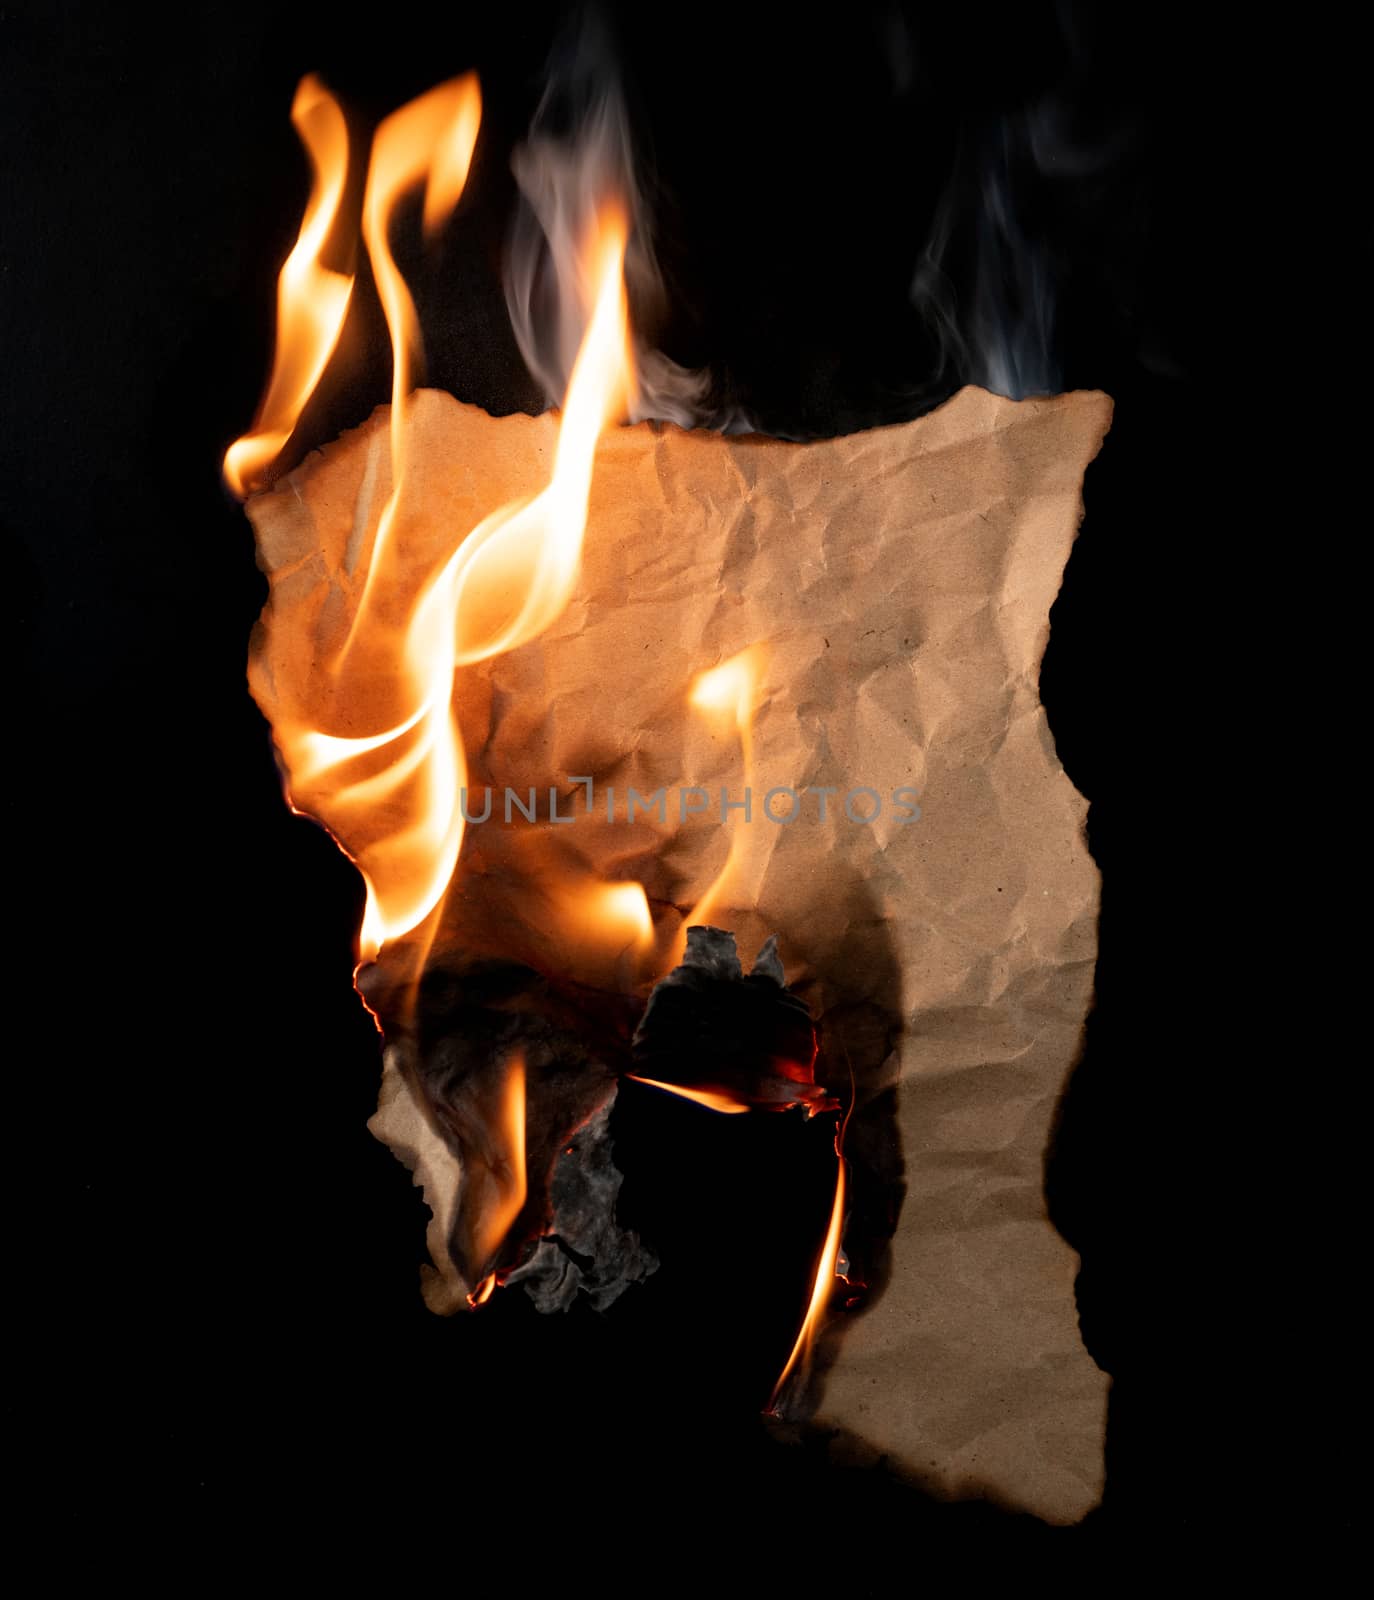 
burning piece of crumpled paper by anankkml